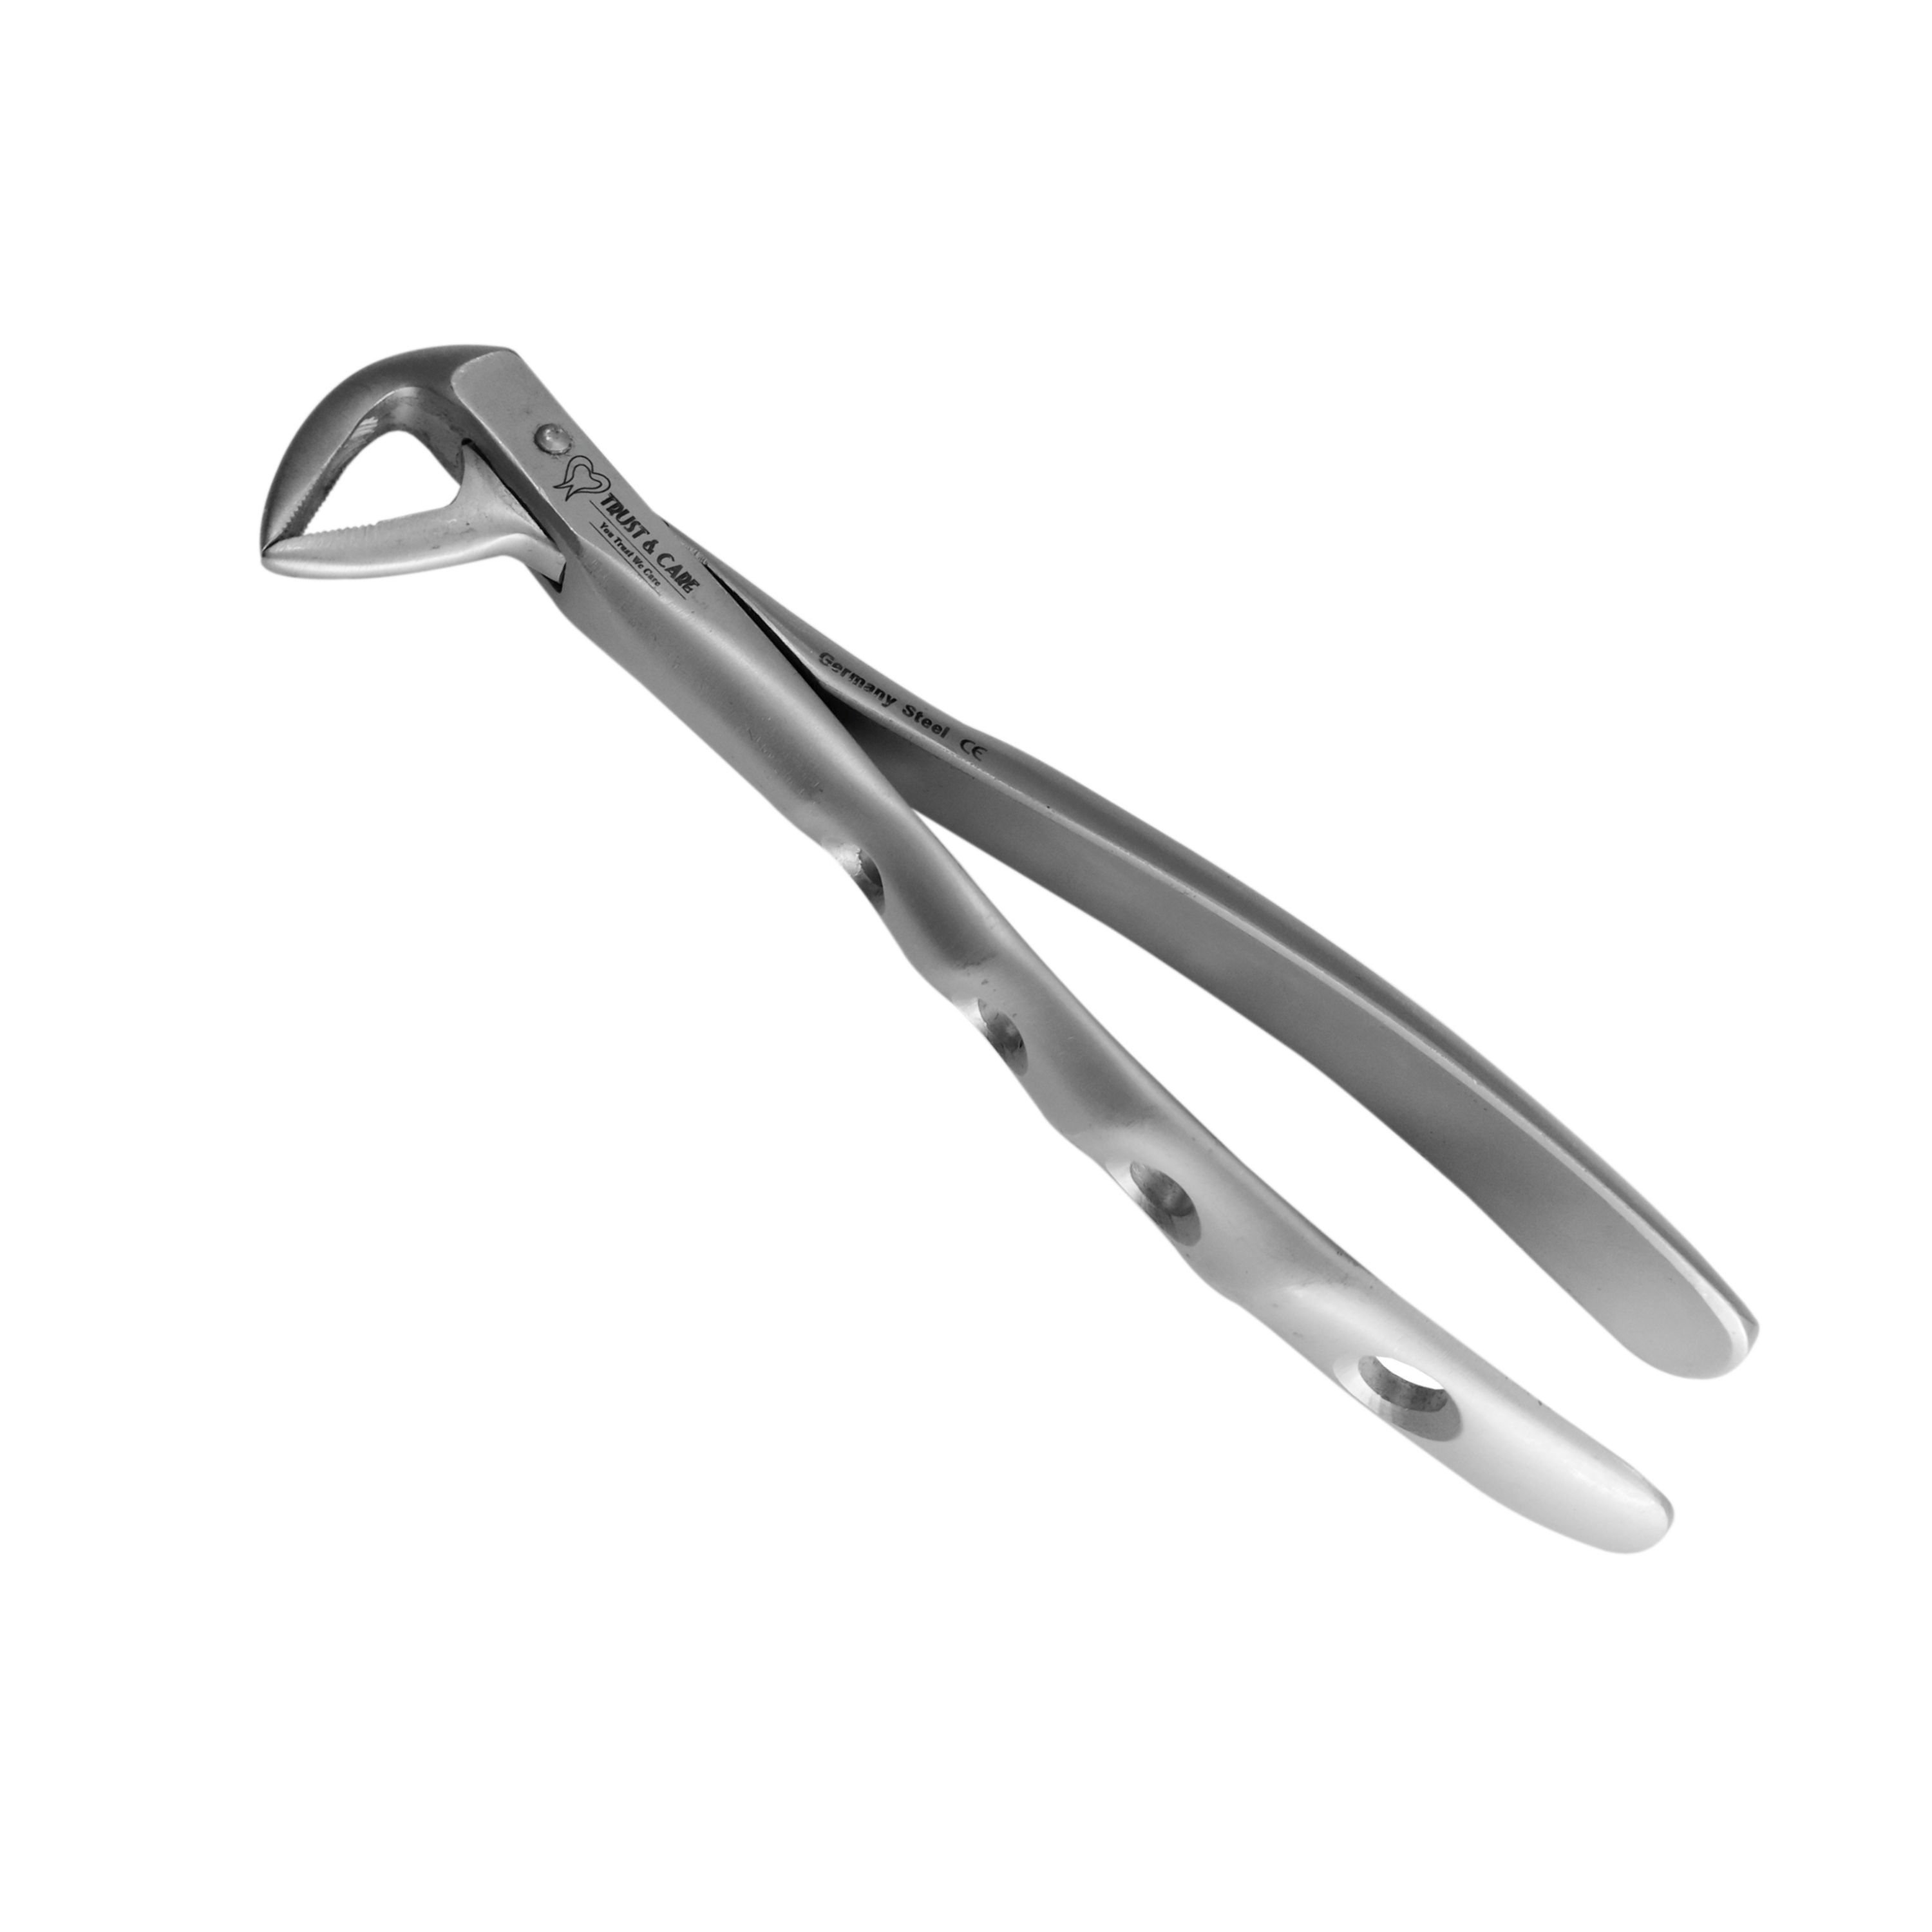 Trust & Care Tooth Extraction Forcep Lower Roots Fig No. 33 Premium